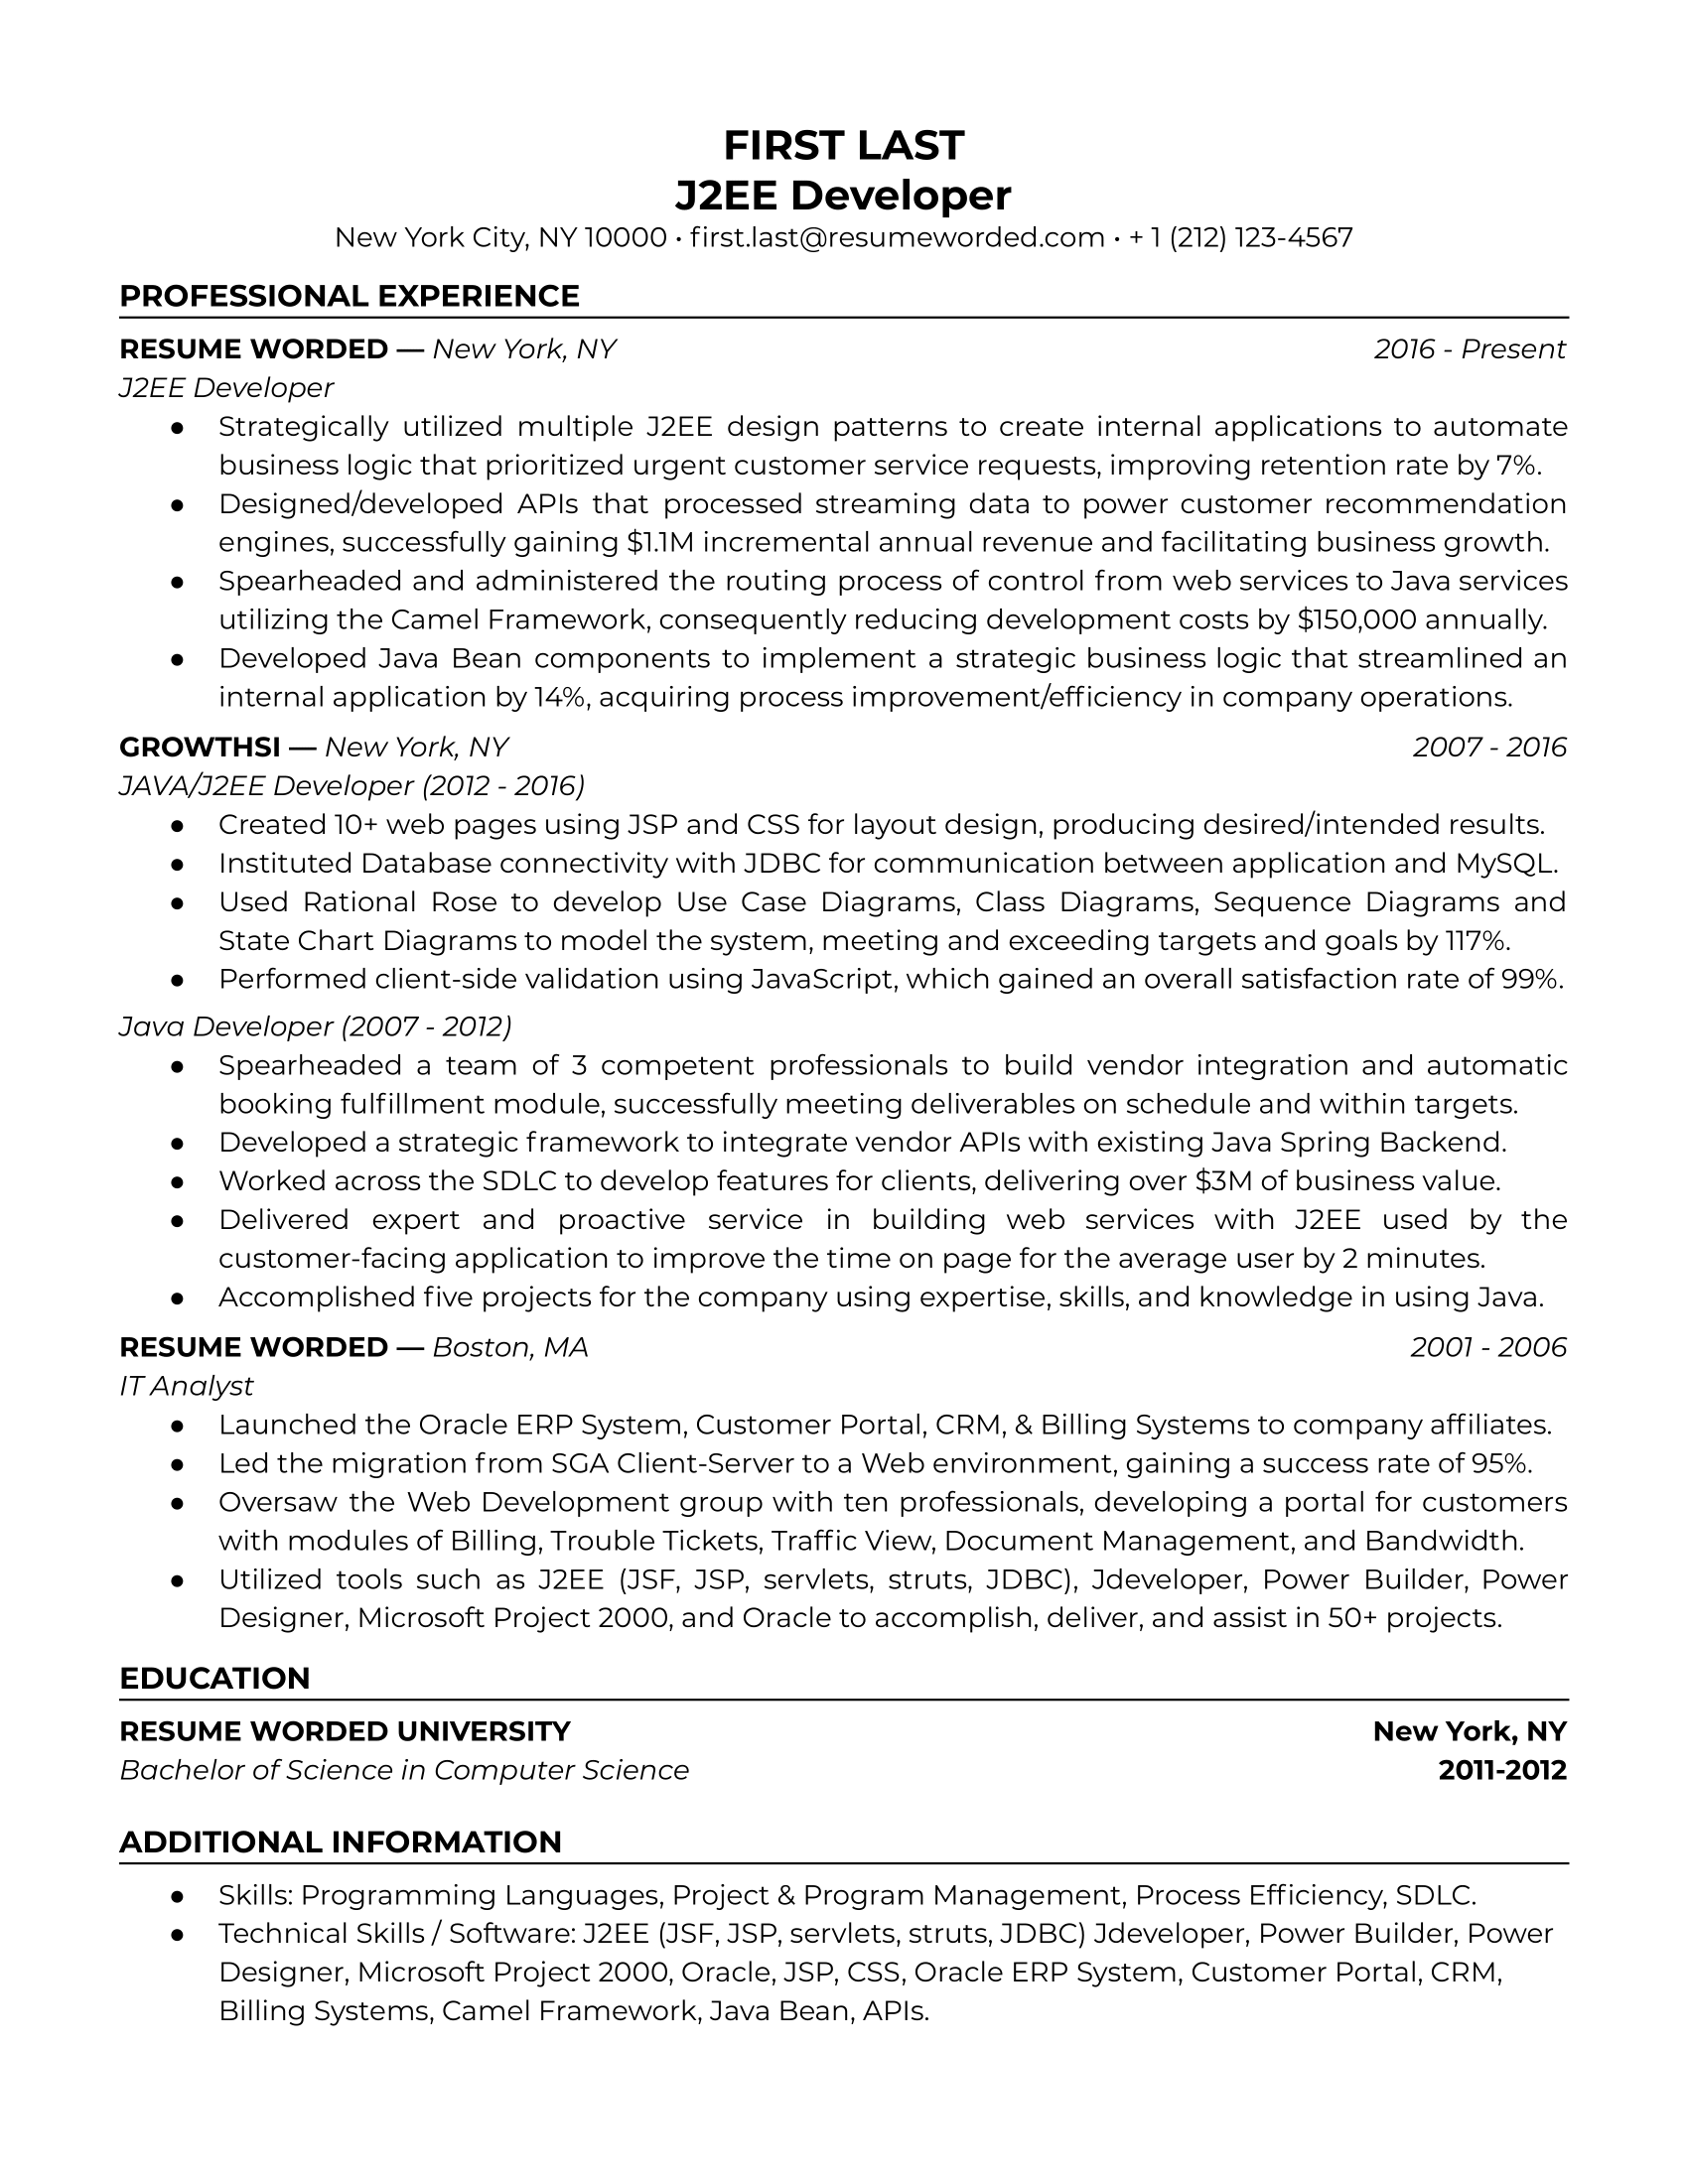 A resume for a J2EE developer with a bachelor's degree and experience as an IT analyst and Java developer.